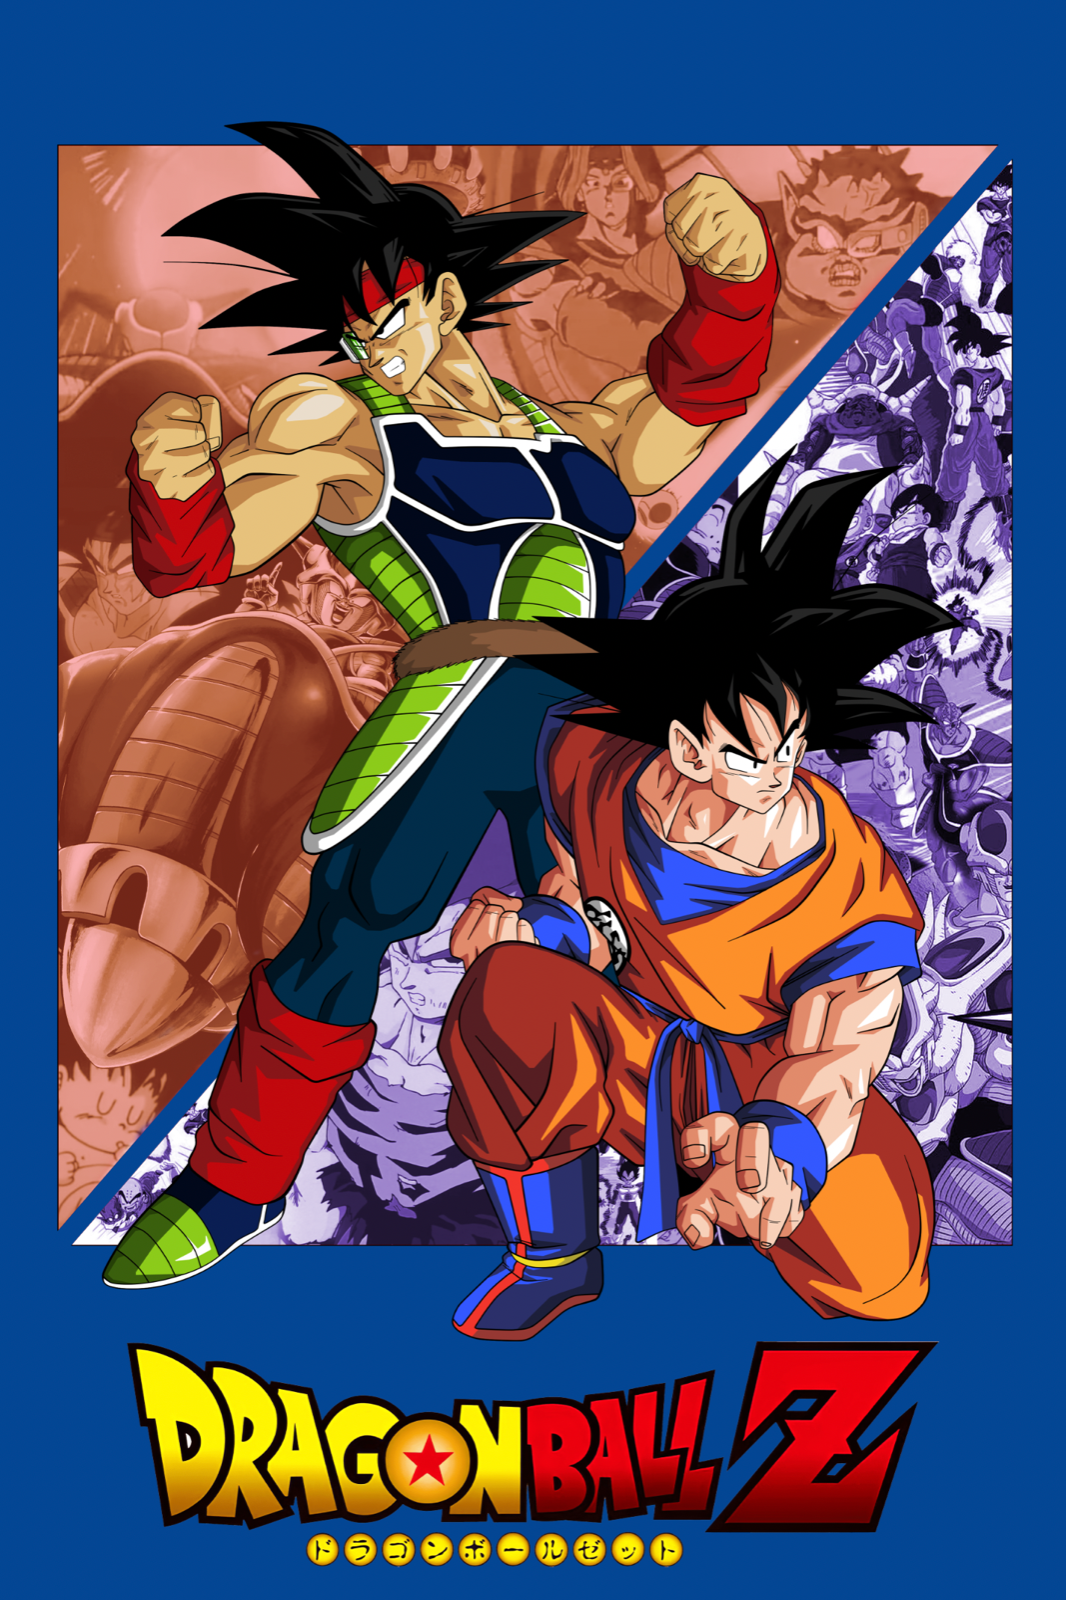 Dragon Ball Z Poster Goku And Bardock W Background 12inx18in Free Shipping